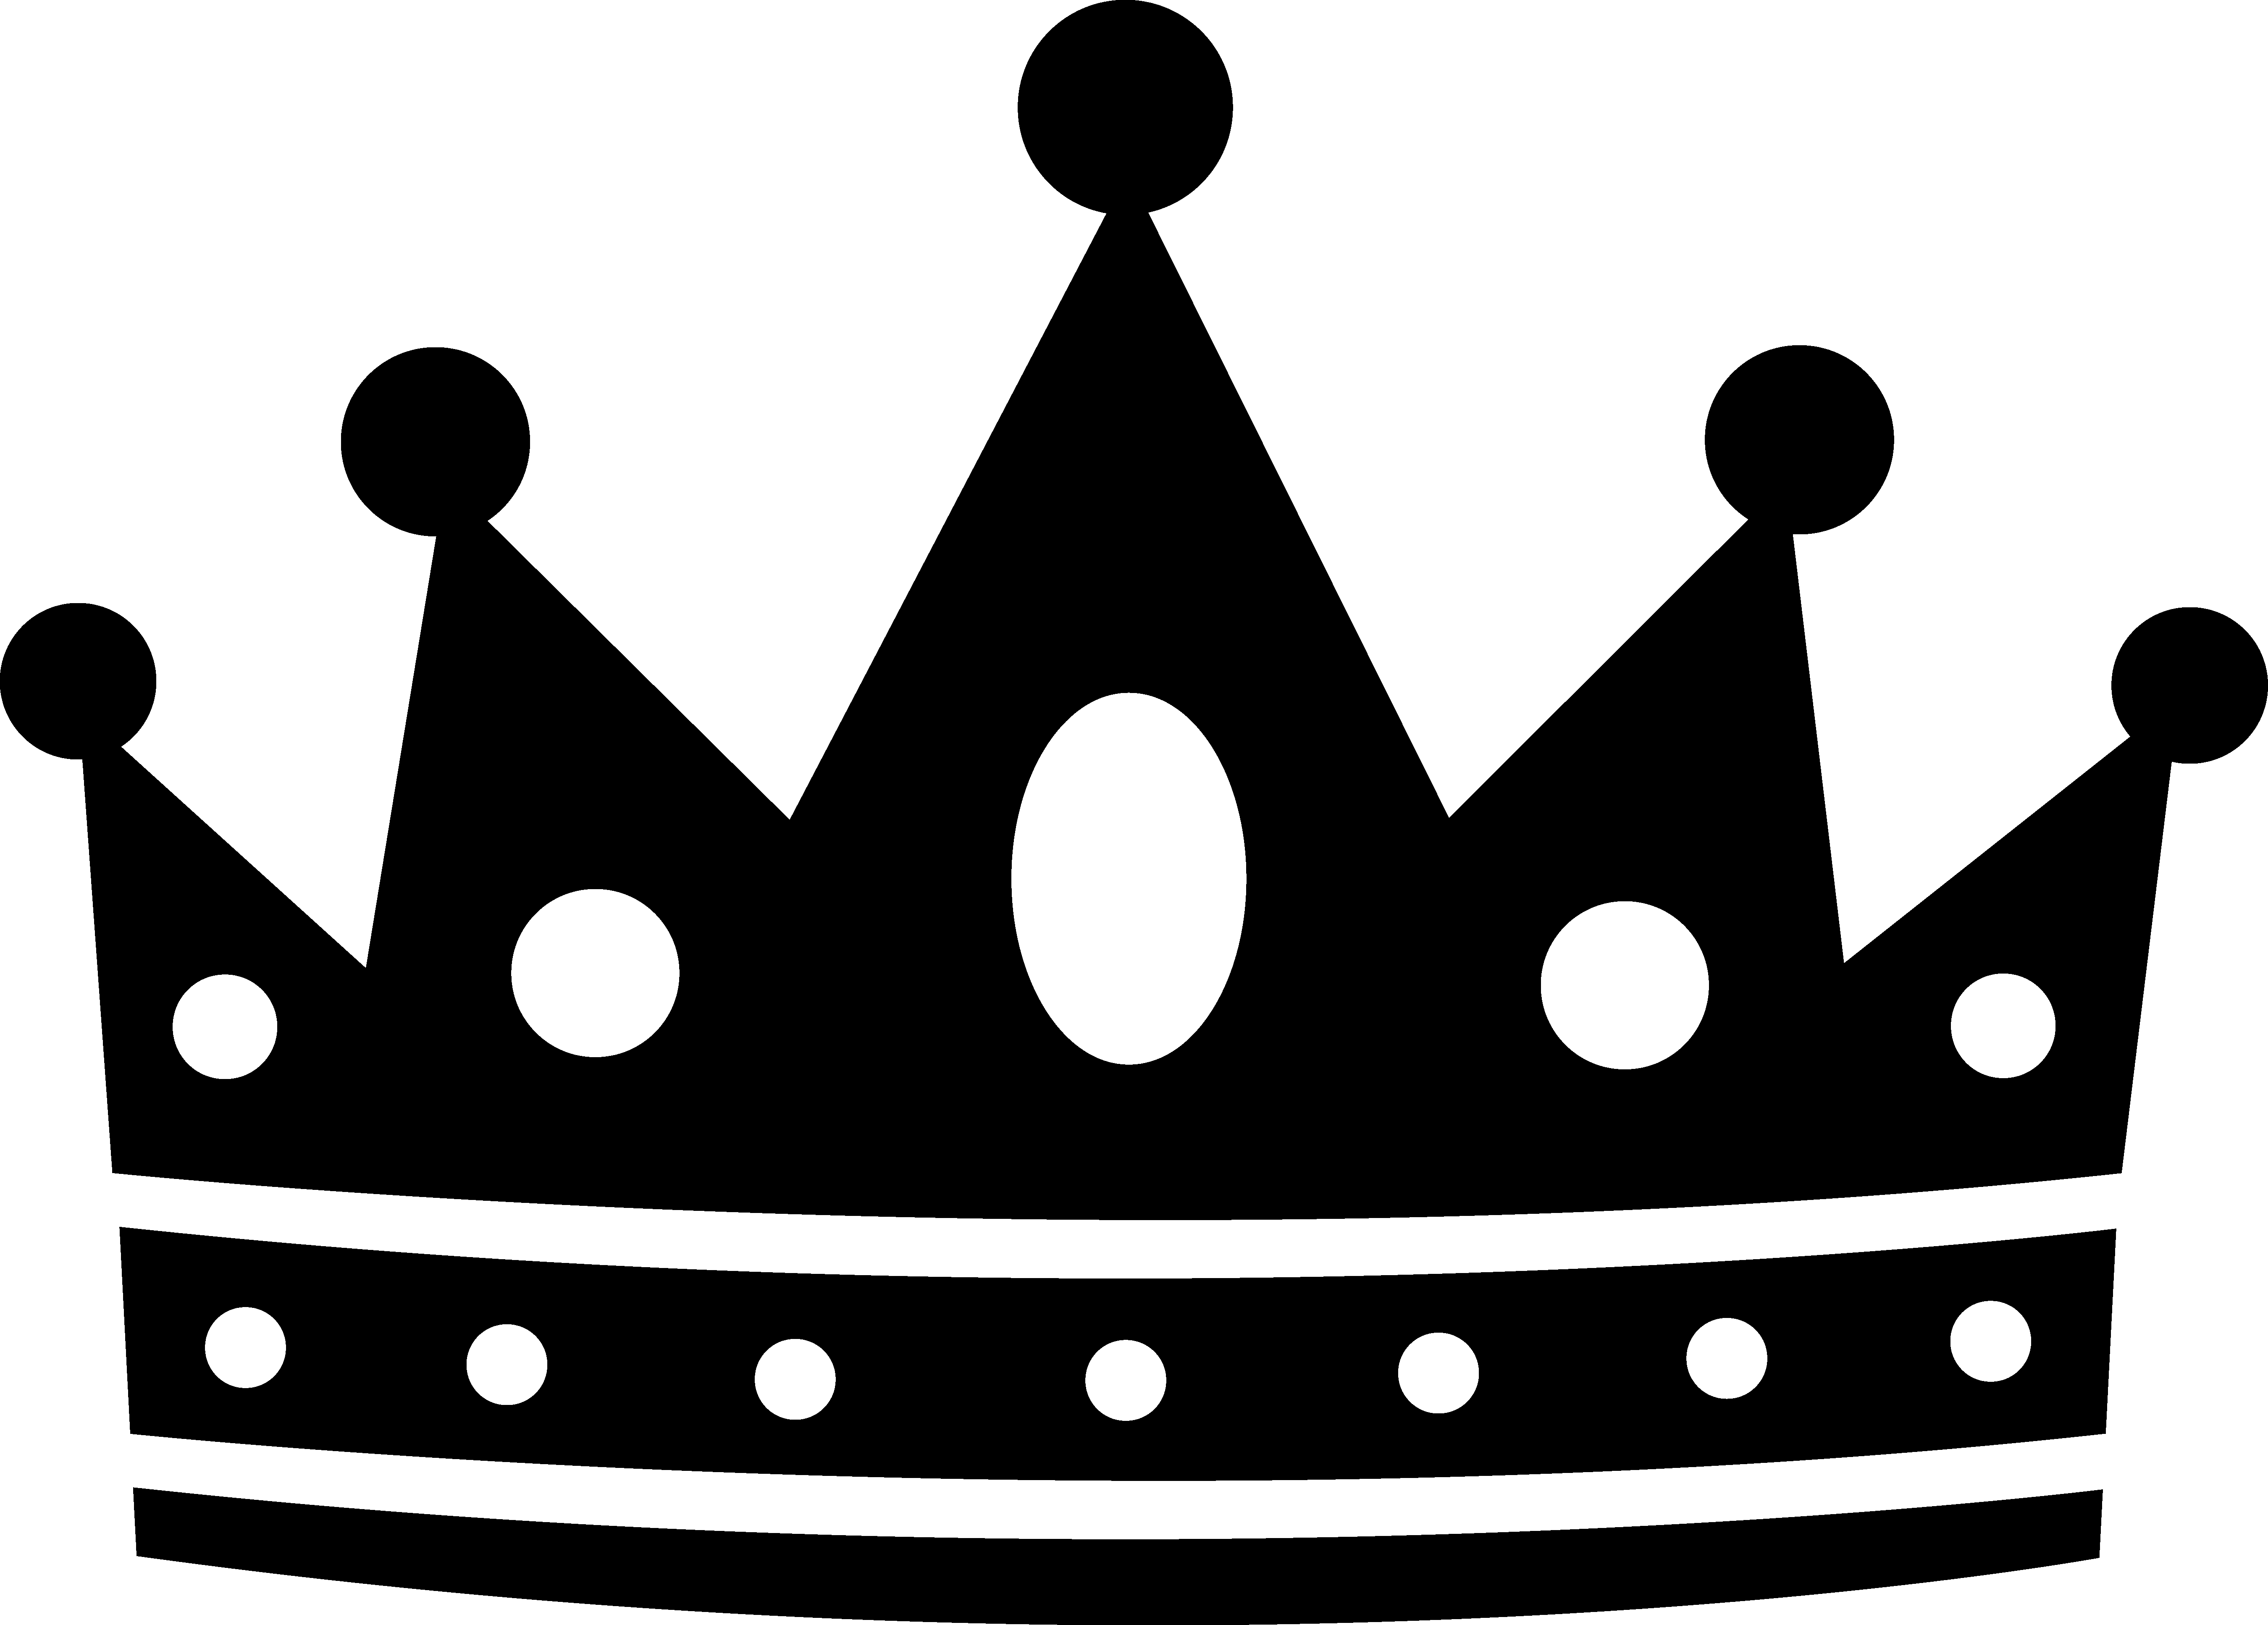 crown in clipart - photo #43